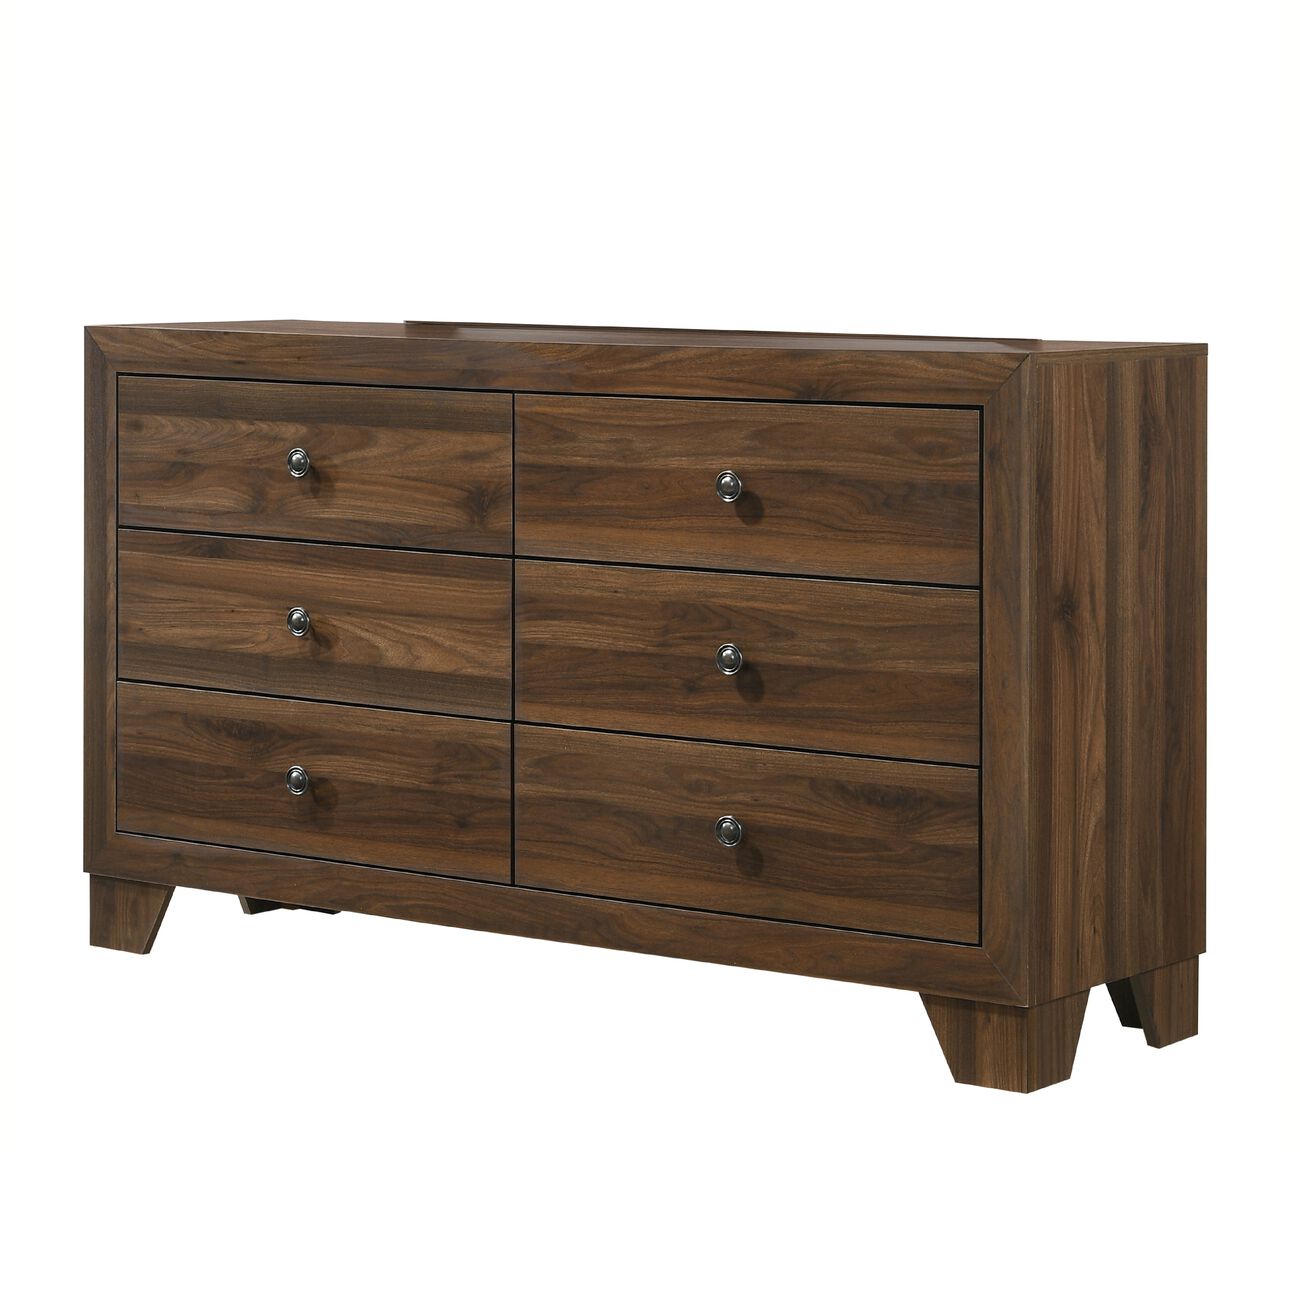 6 Drawer Wooden Dresser with Round Knobs and Tapered Legs, Brown - BM215246